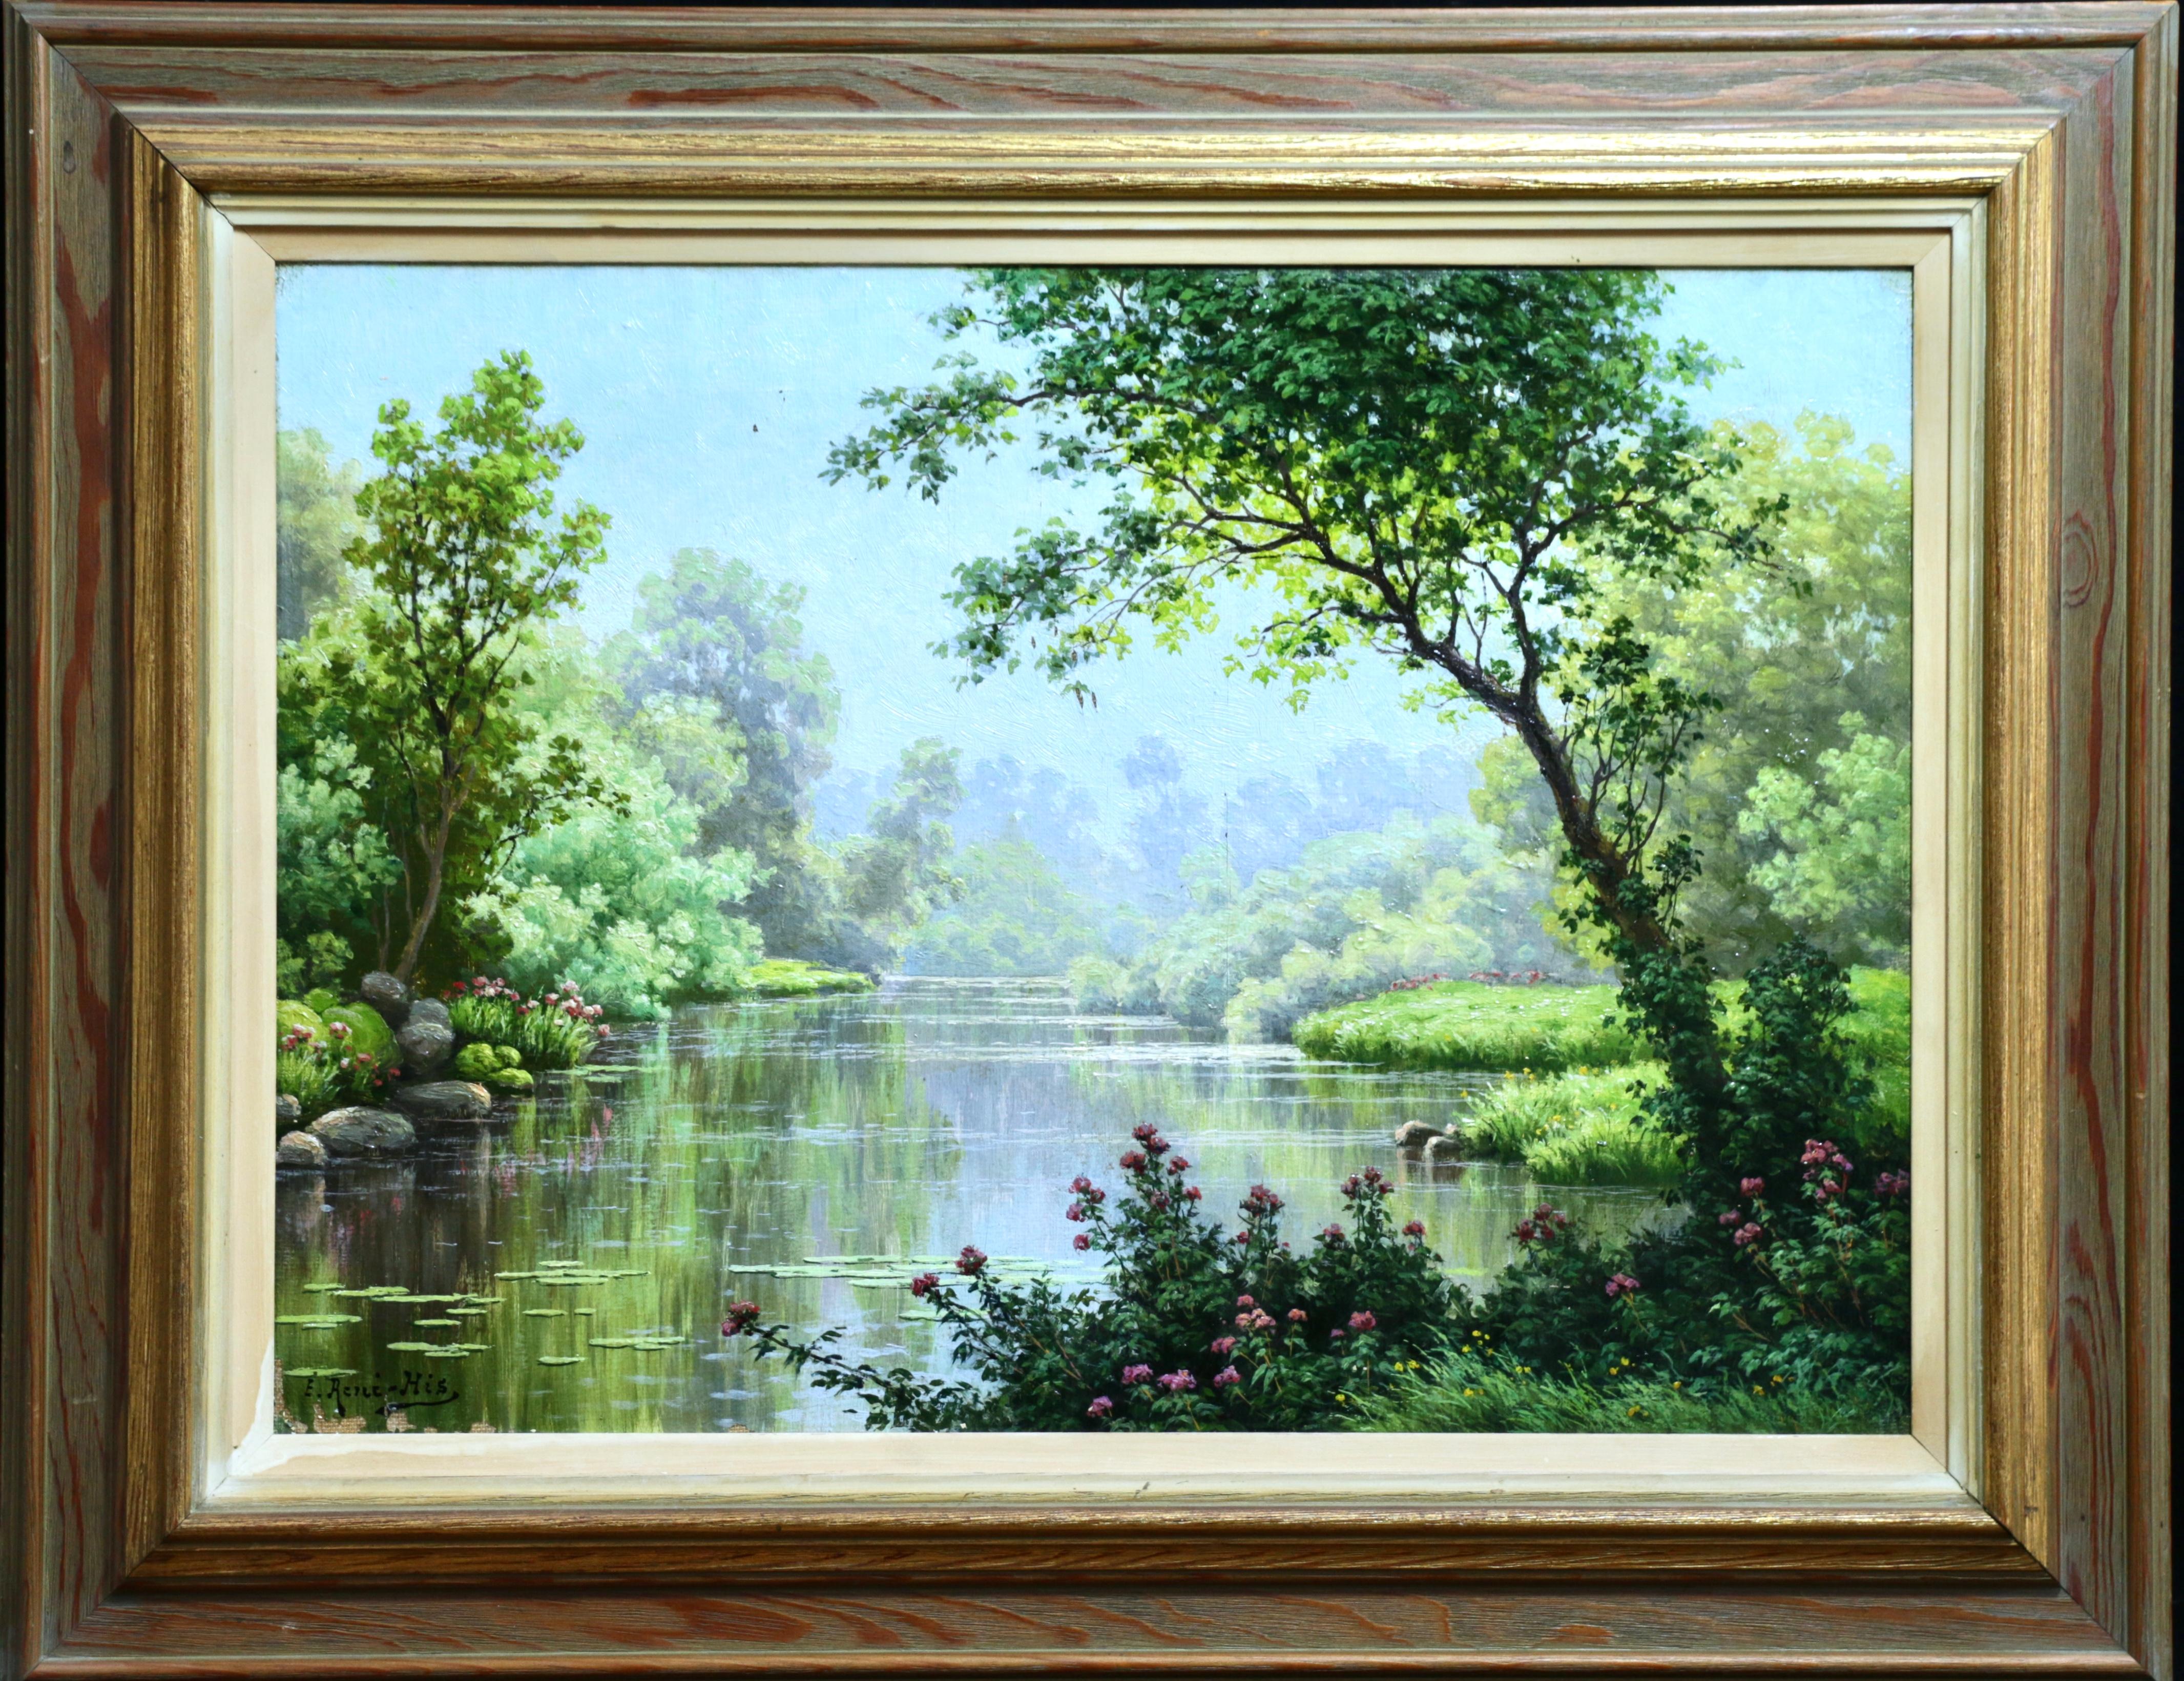 Water Lilies on a River - Mid 20th Century Oil, Riverscape Landscape by Rene His - Painting by René Charles Edmond His